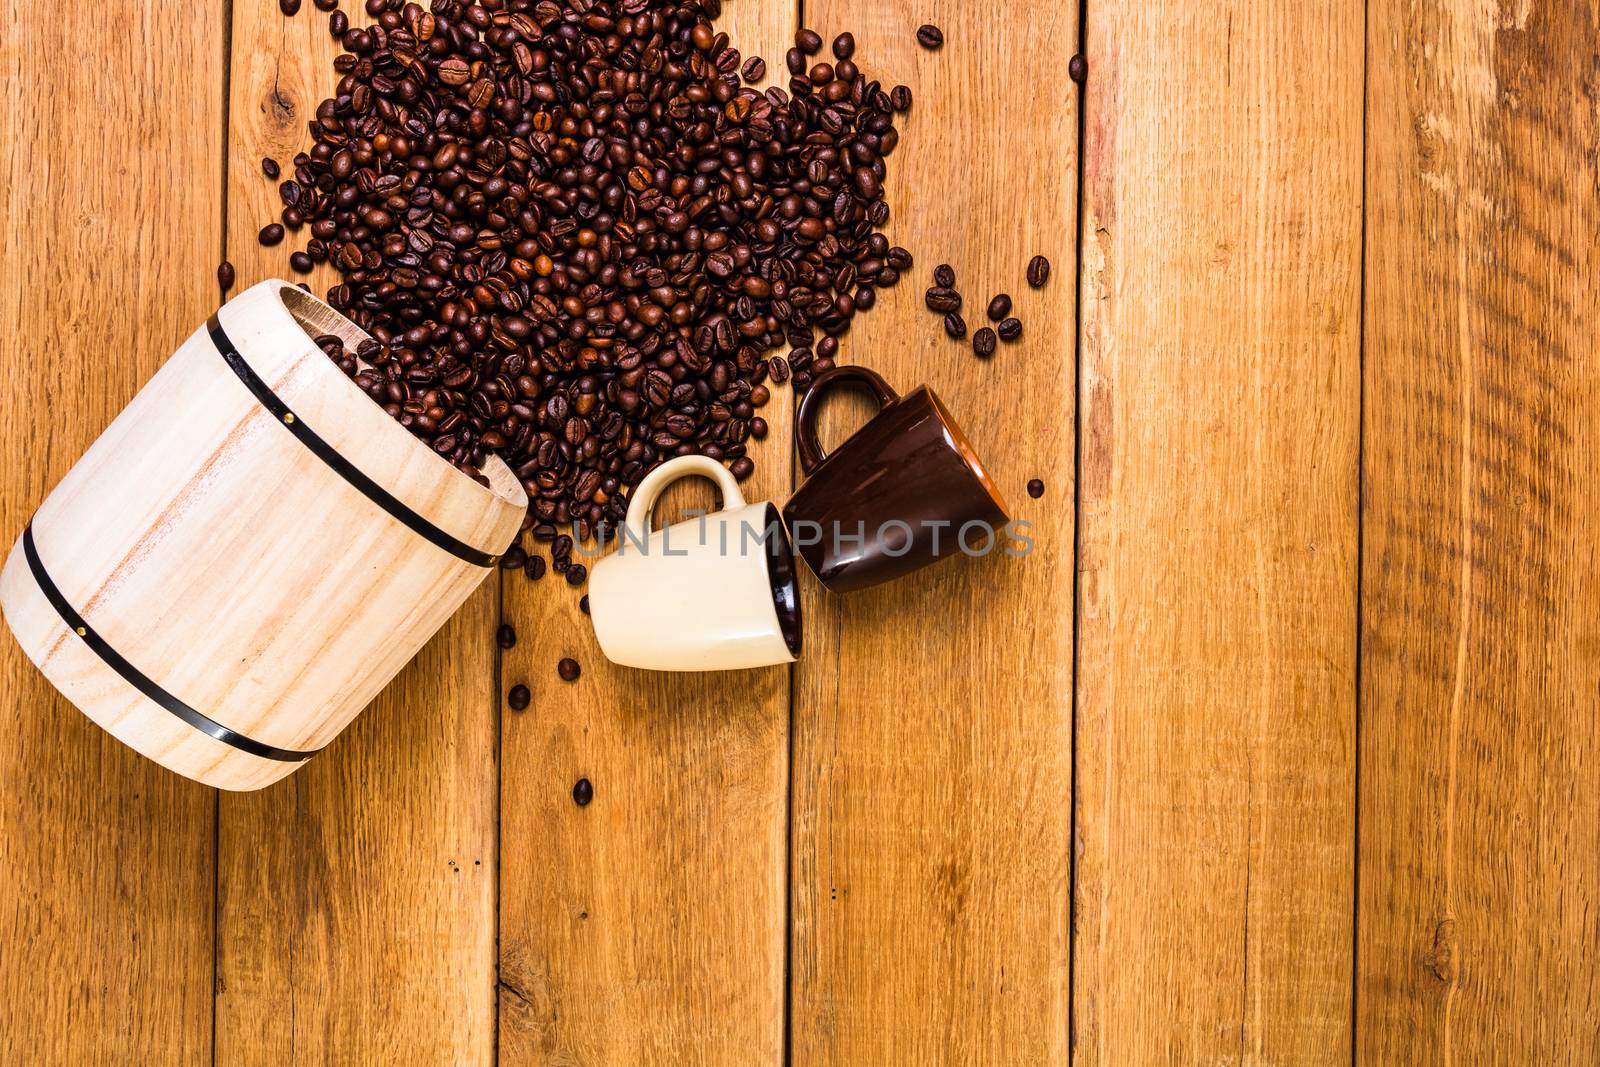 Cup of coffee, roasted coffee beans on wooden background, coffee wooden barrel top view, copy space for text, close up coffee photo